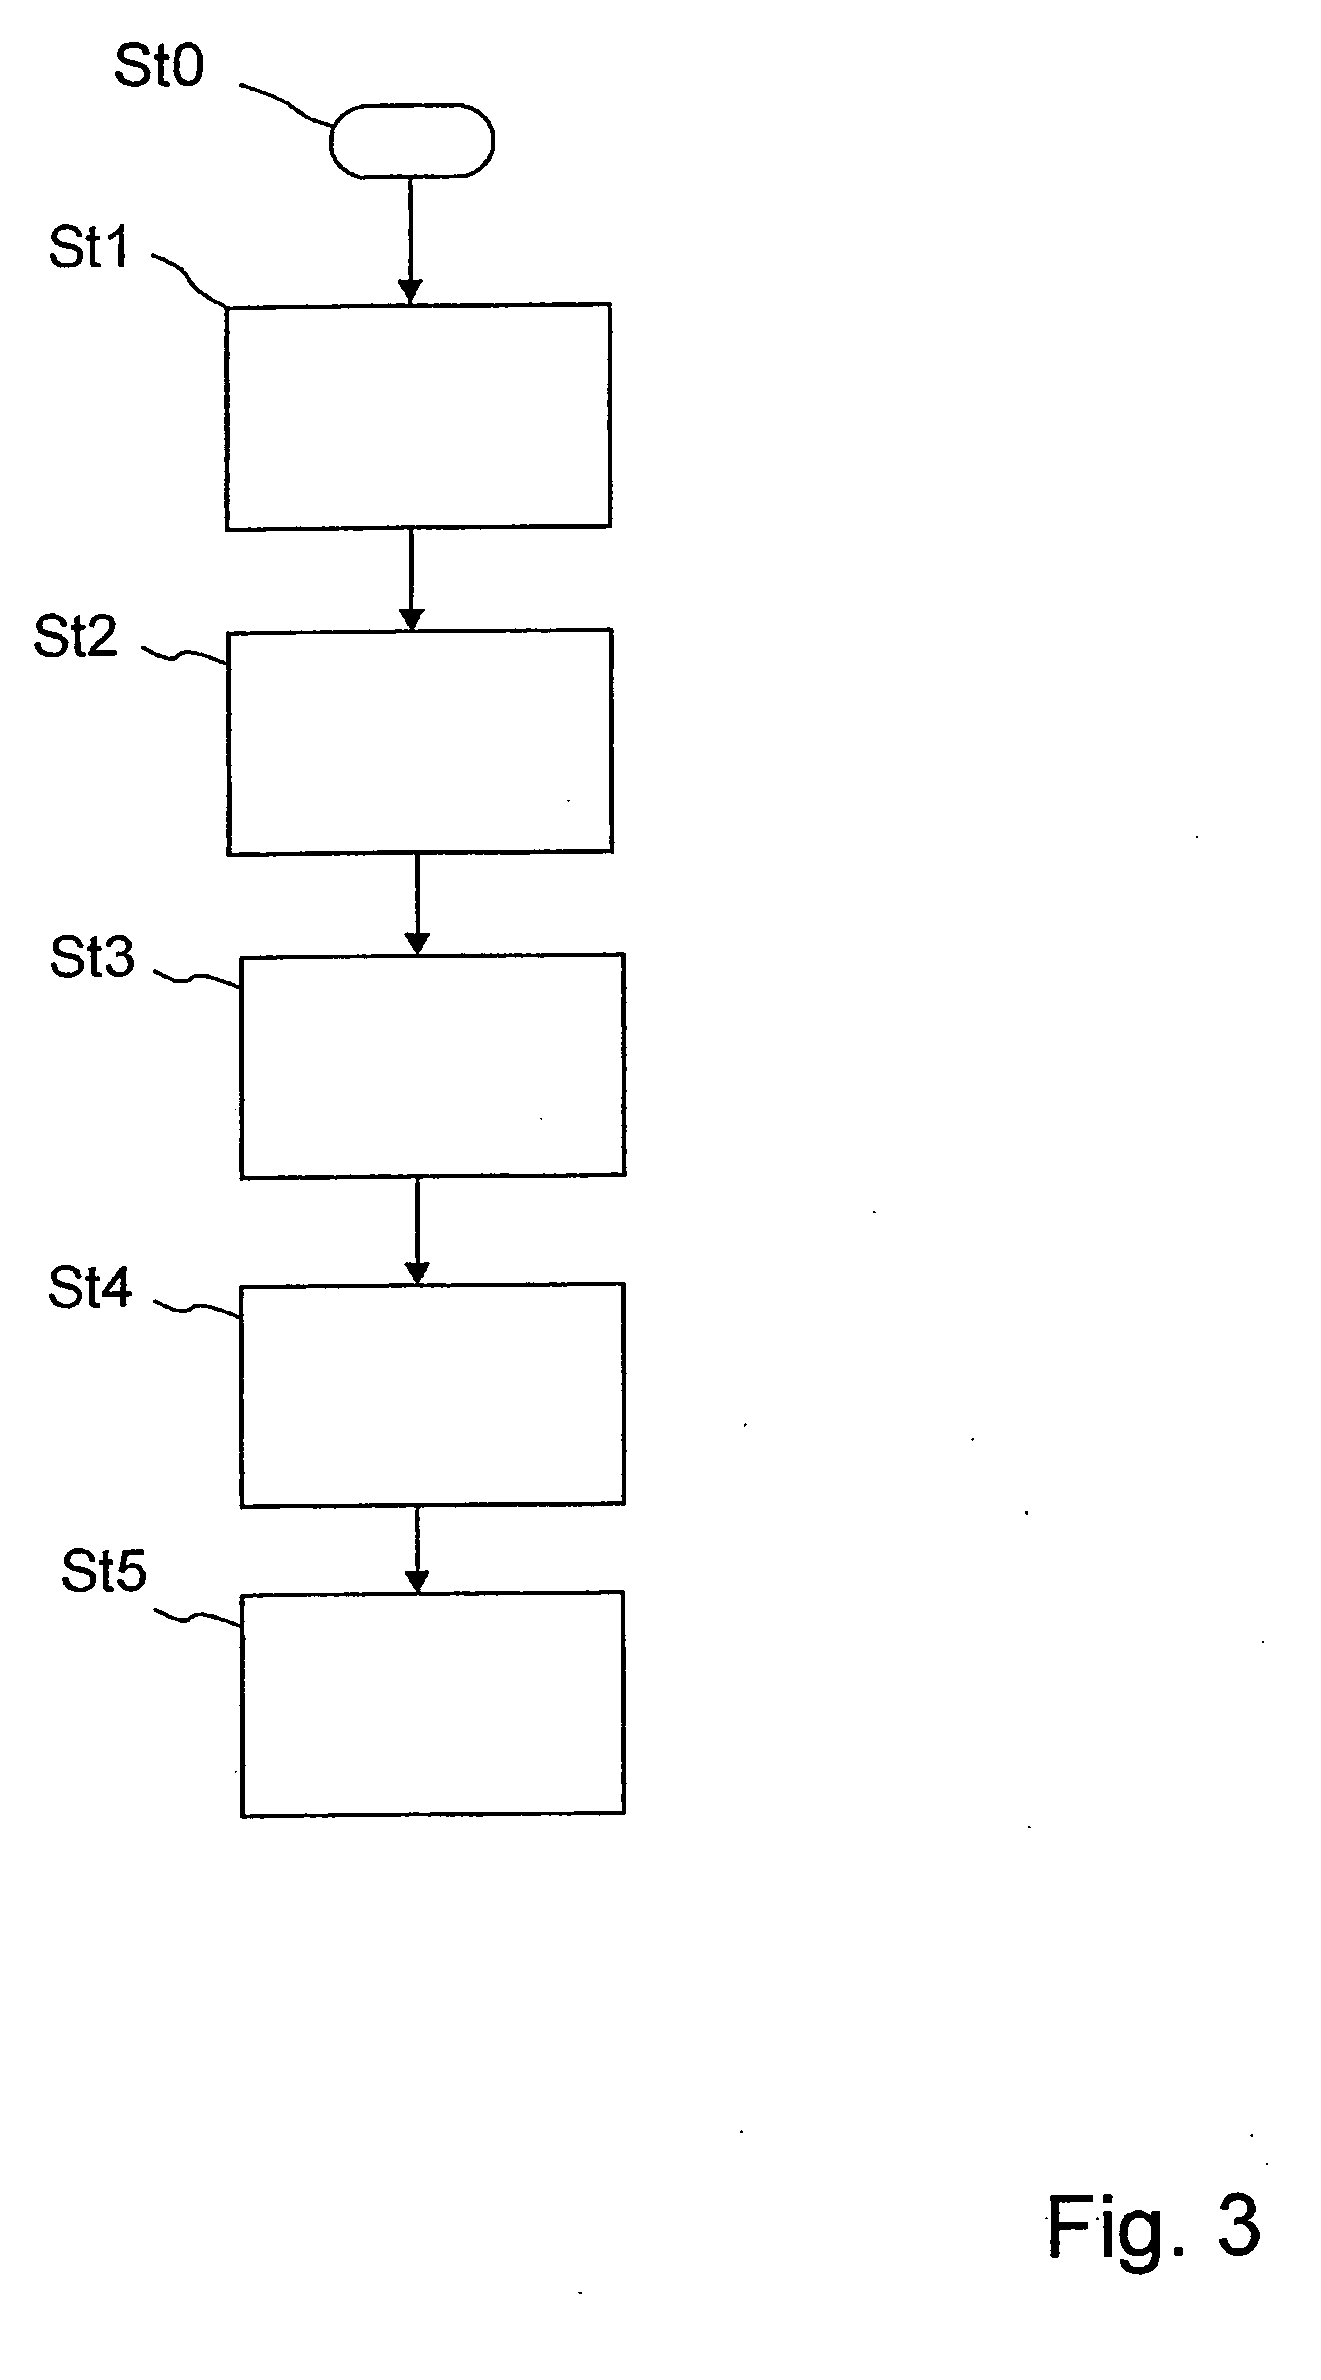 Method for producing and outputting web pages via a computer network, and web page produced thereby